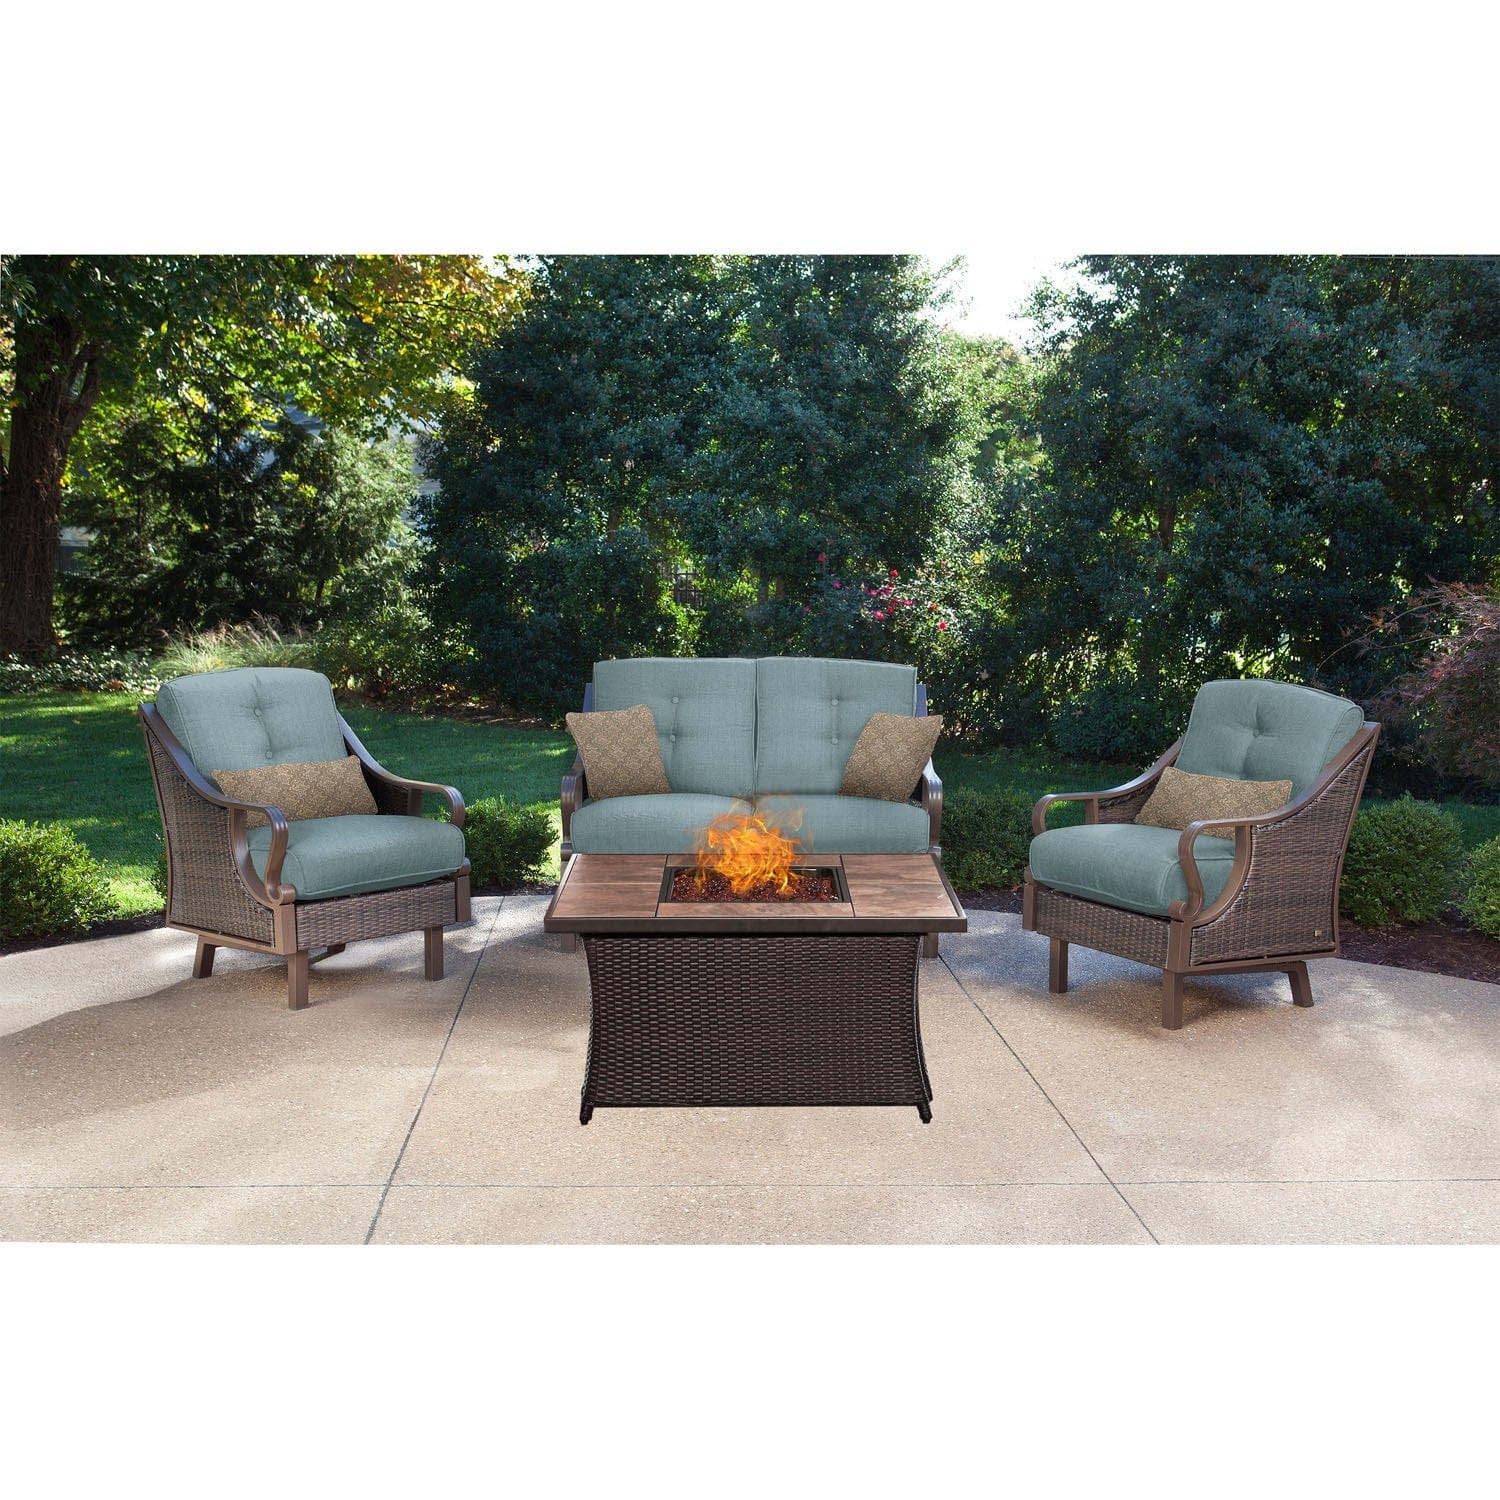 Hanover Fire Pit Chat Set Hanover - Ventura 4-Piece Fire Pit Chat Set | with Tan Tile Top | Brown/Blue | VEN4PCFP-BLU-TN